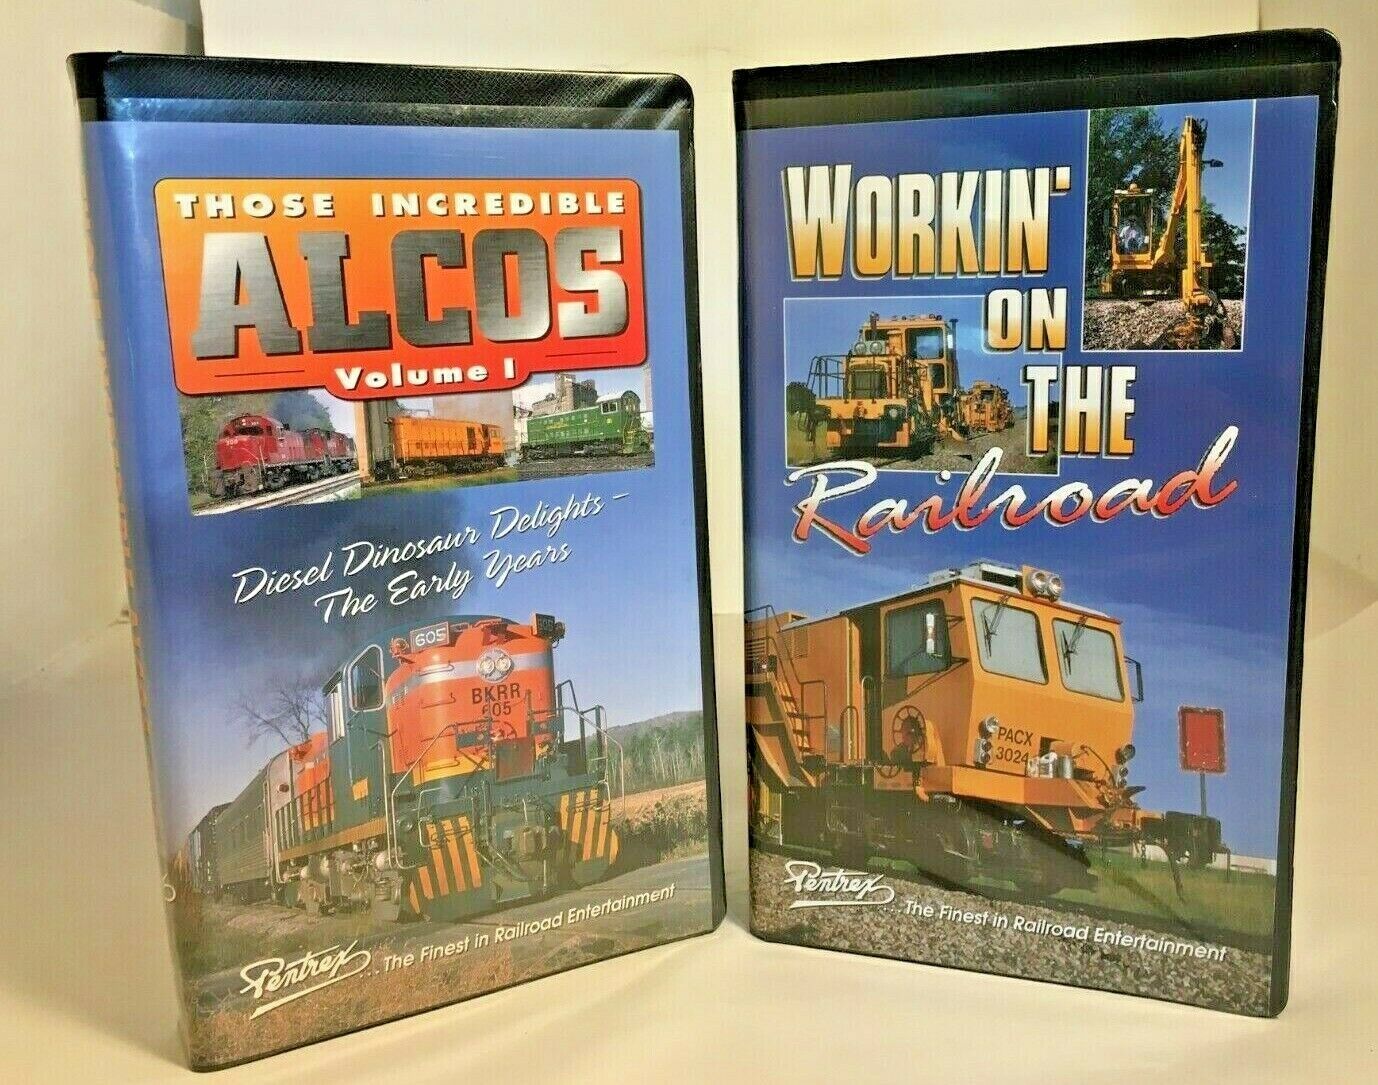 Pentrex Train VHS Videos Those Incredible Alcos Vol I & Workin' on the Railroad